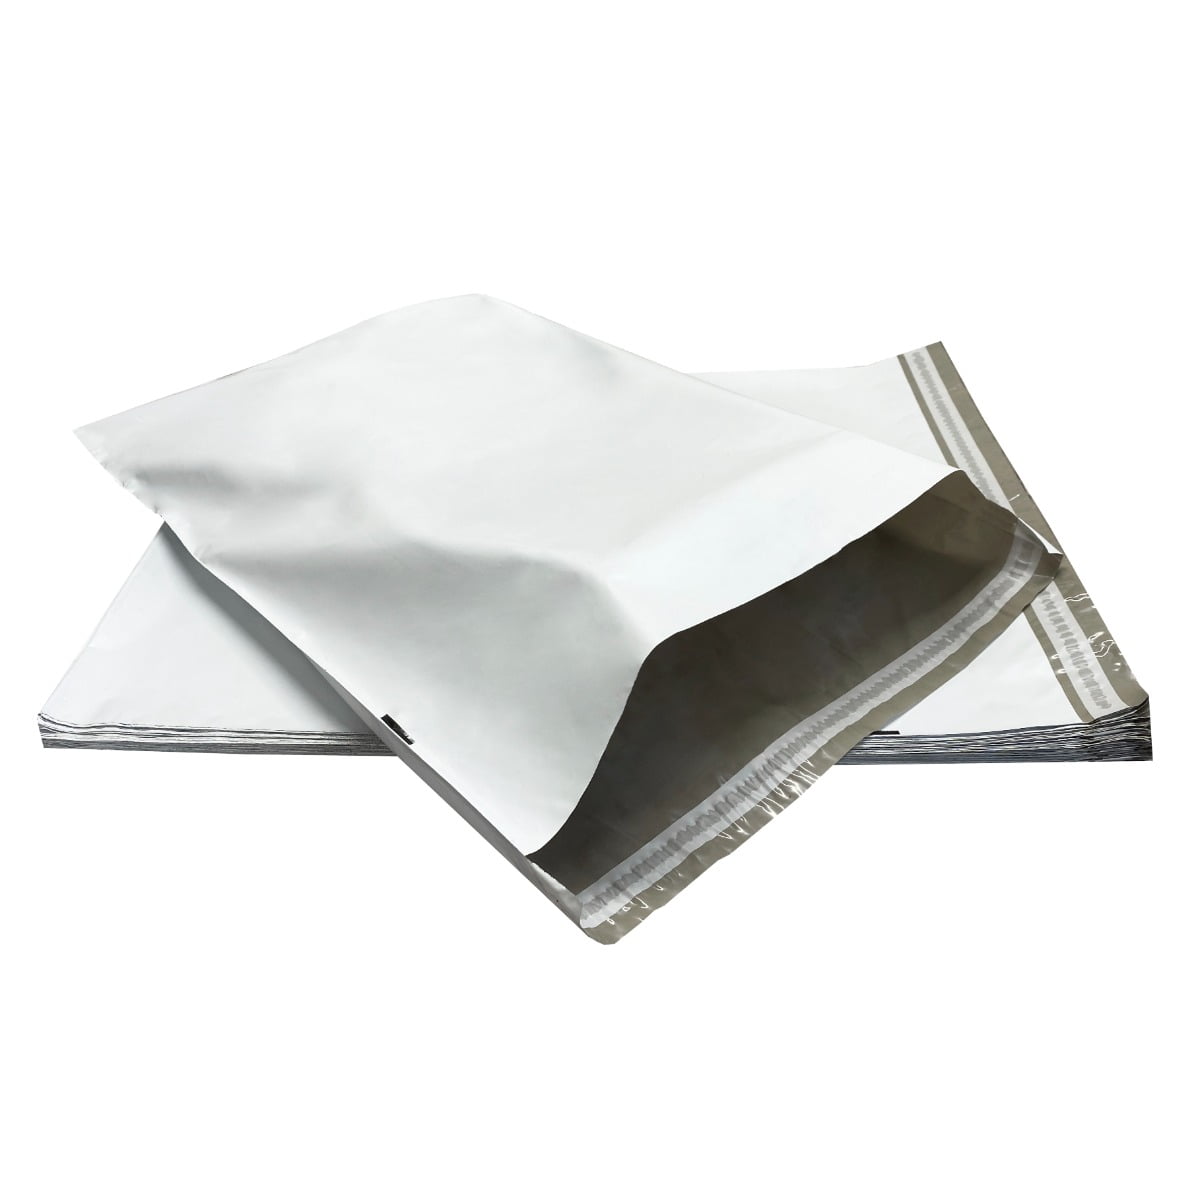 100 Poly Mailers Shipping Bag Mailer 5”x7” 5x7 | Poly mailers, Mailer, 5x7